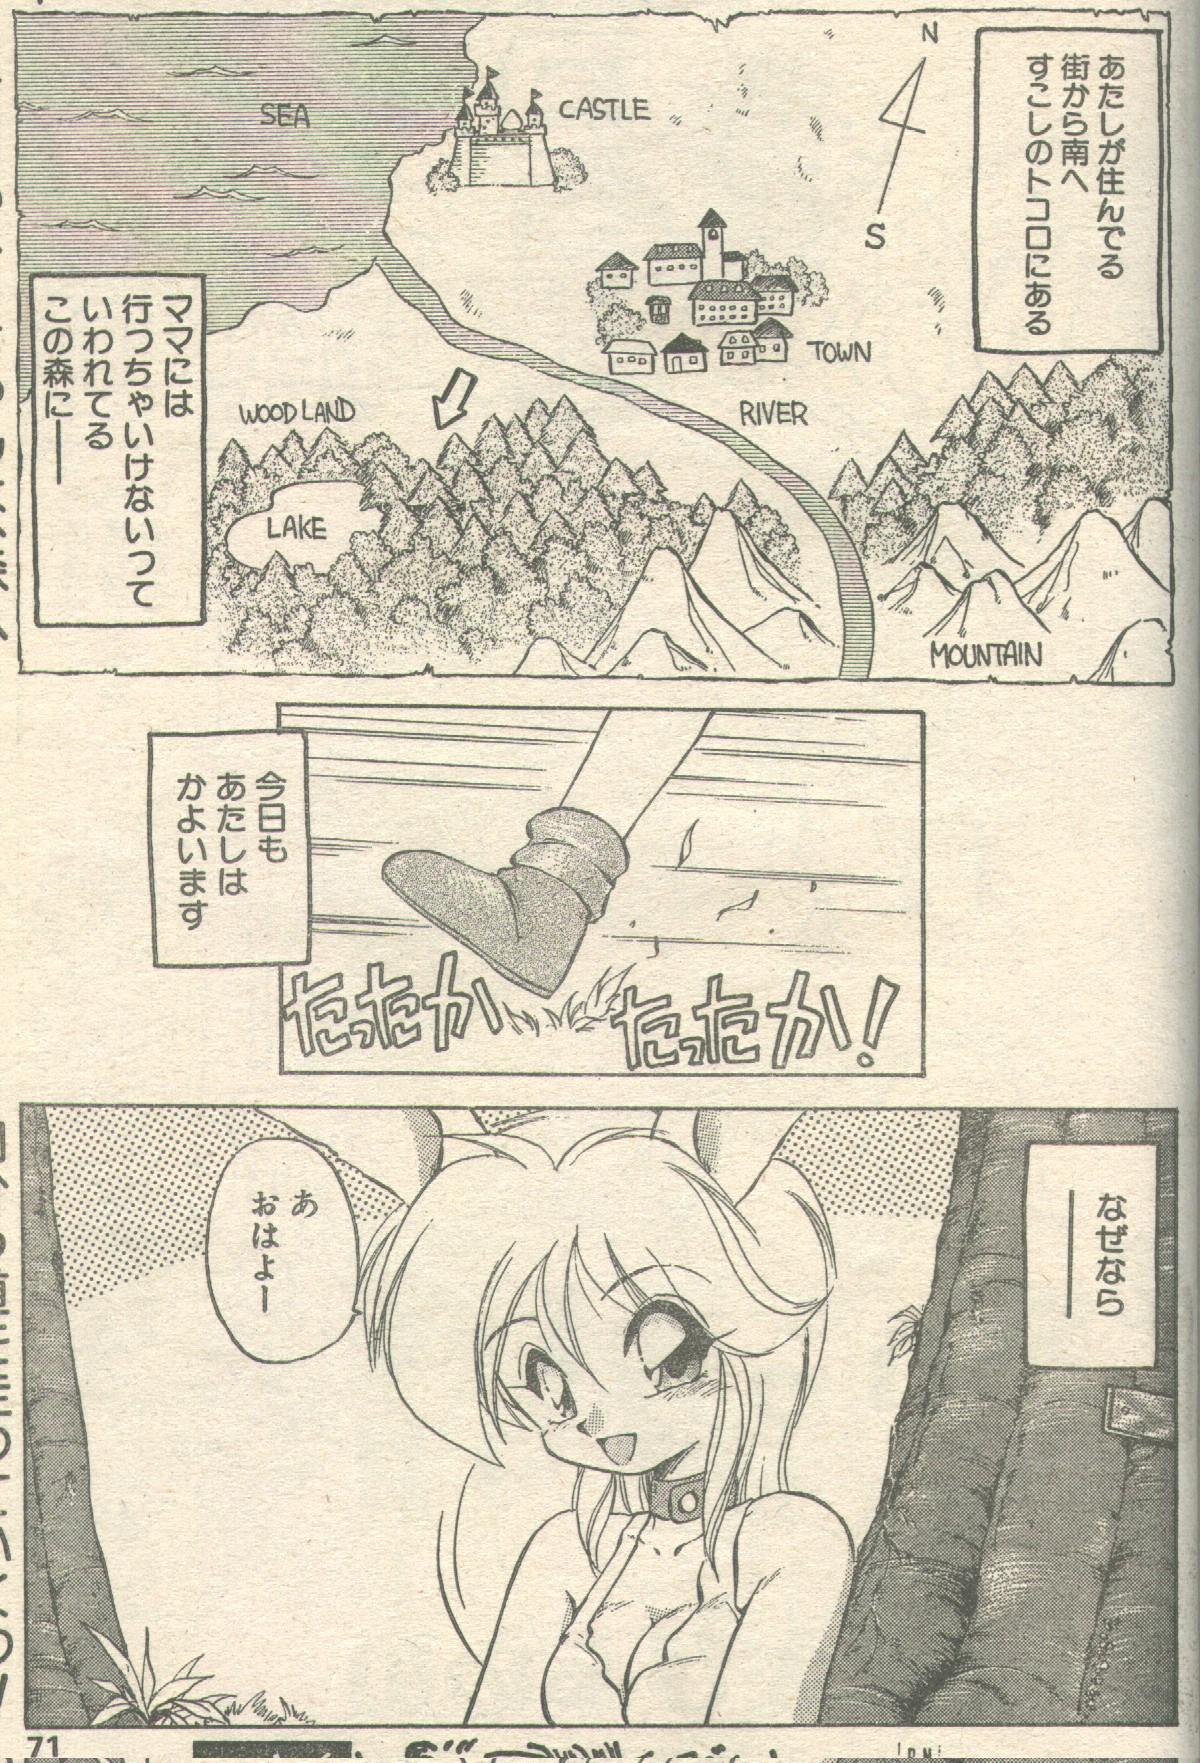 Candy Time 1993-05 [Incomplete] キャンディータイム 1993年05月号 [不完全]